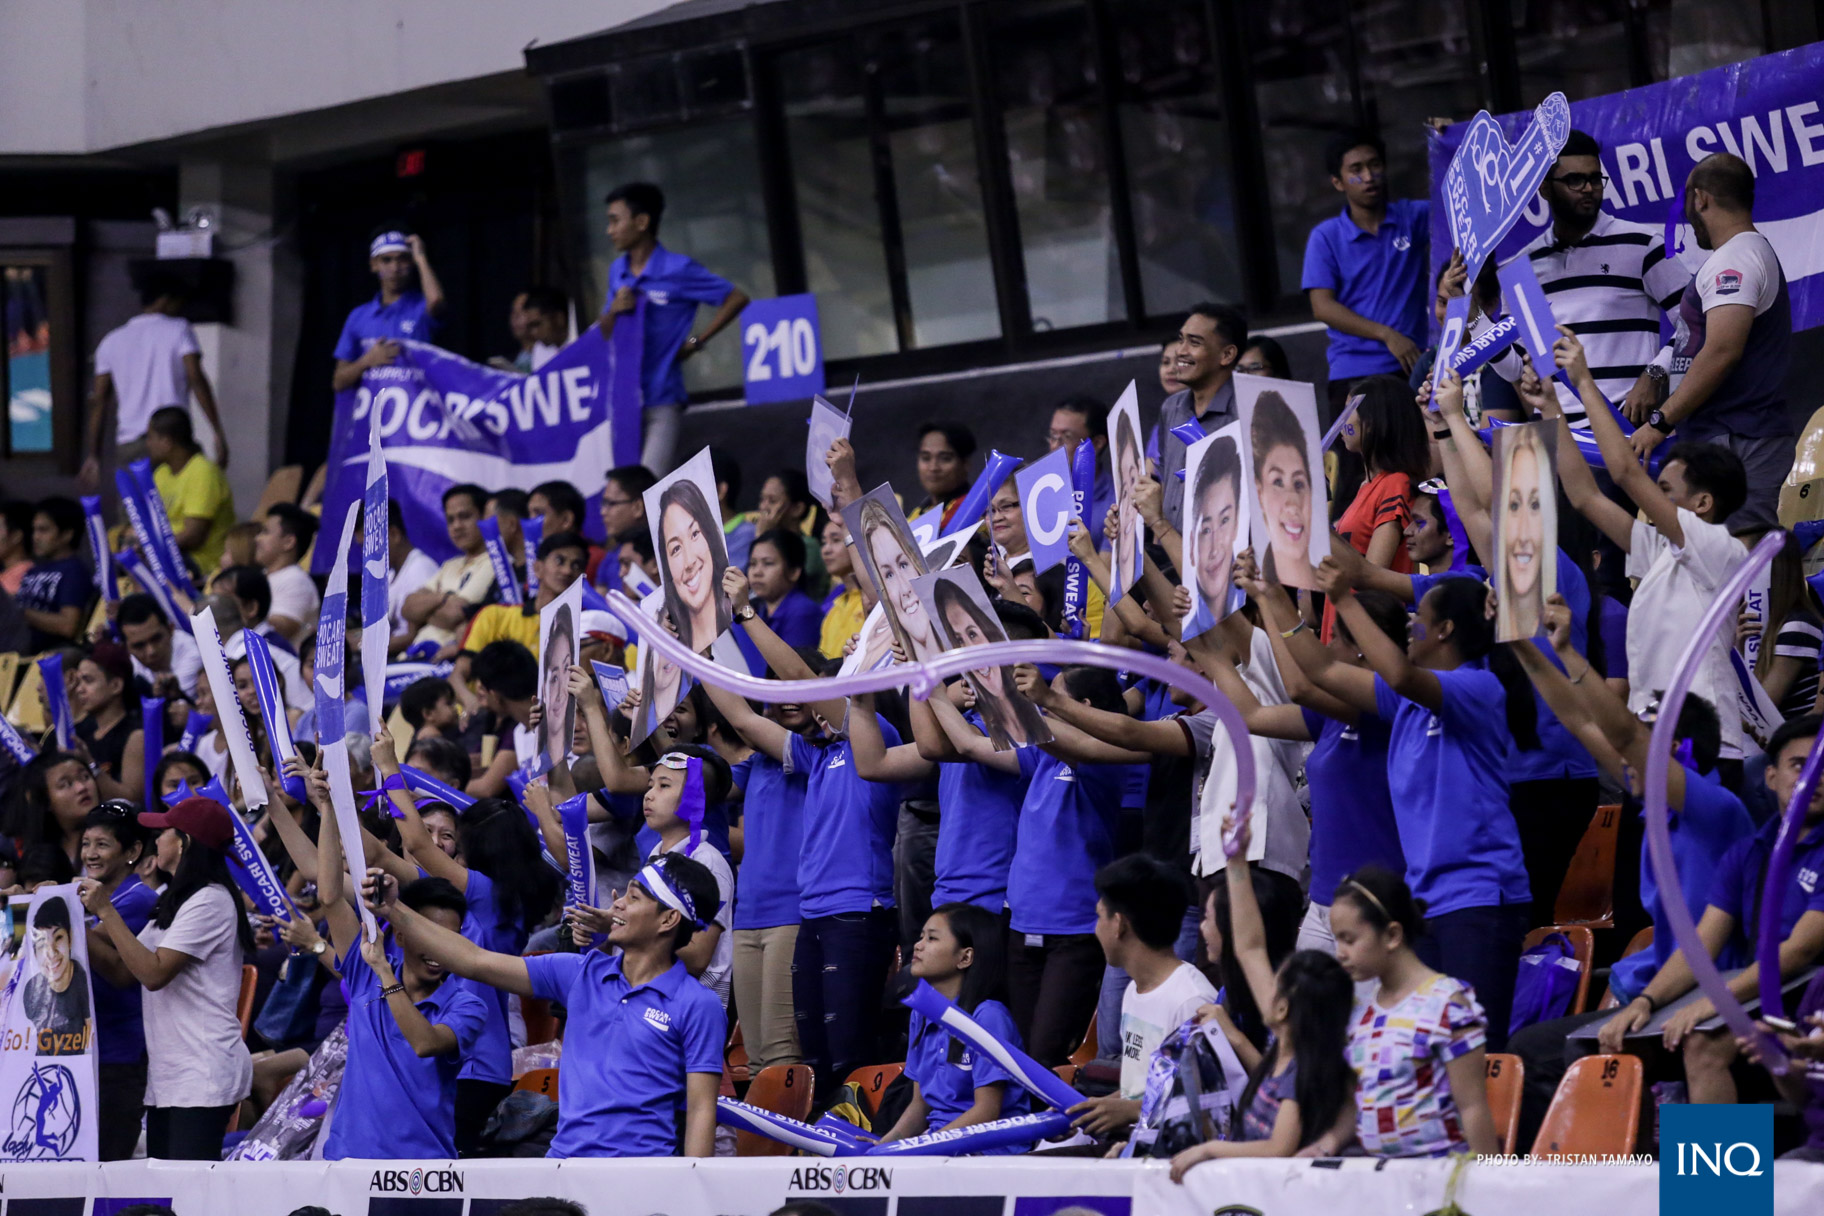 Fans at the Philsports Arena. Photo by Tristan Tamayo/INQUIRER.net